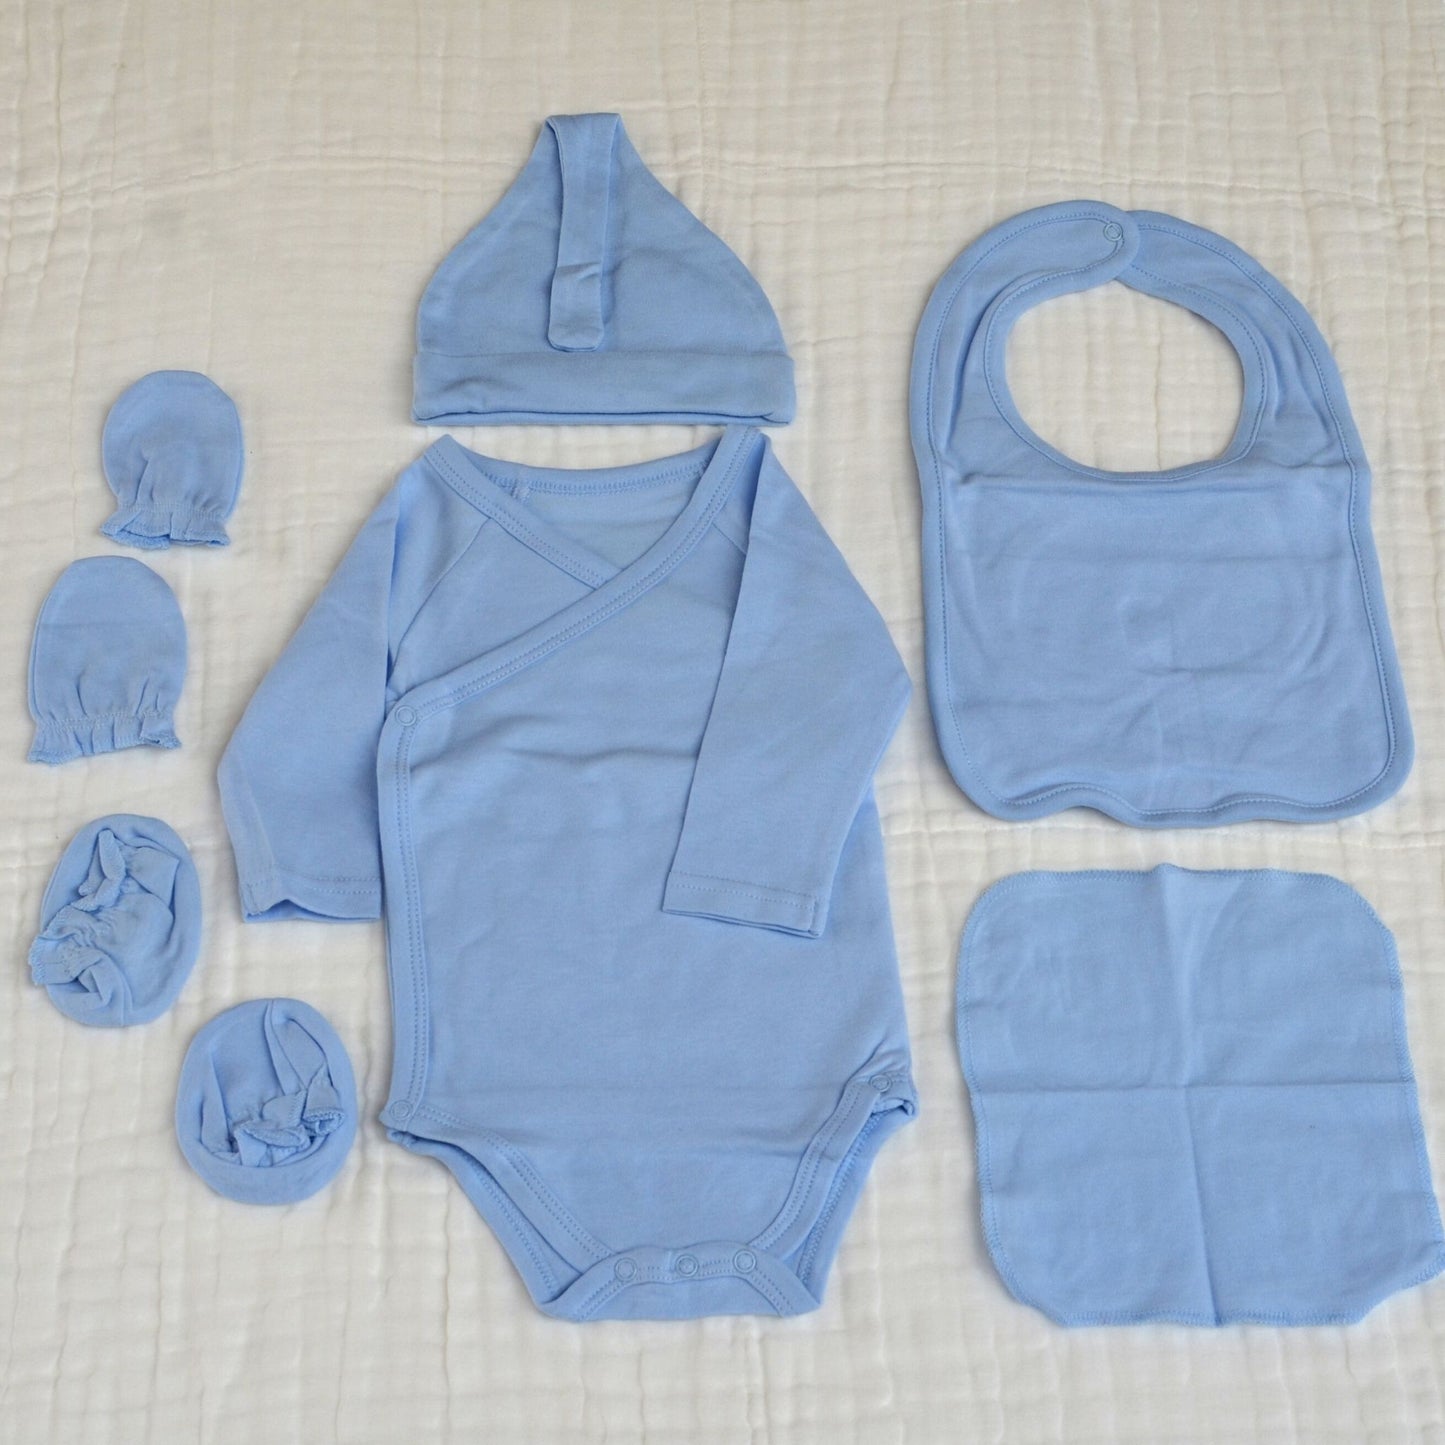 6 Piece Suit Set - 0 to 3 Month Size Take Home Outfit